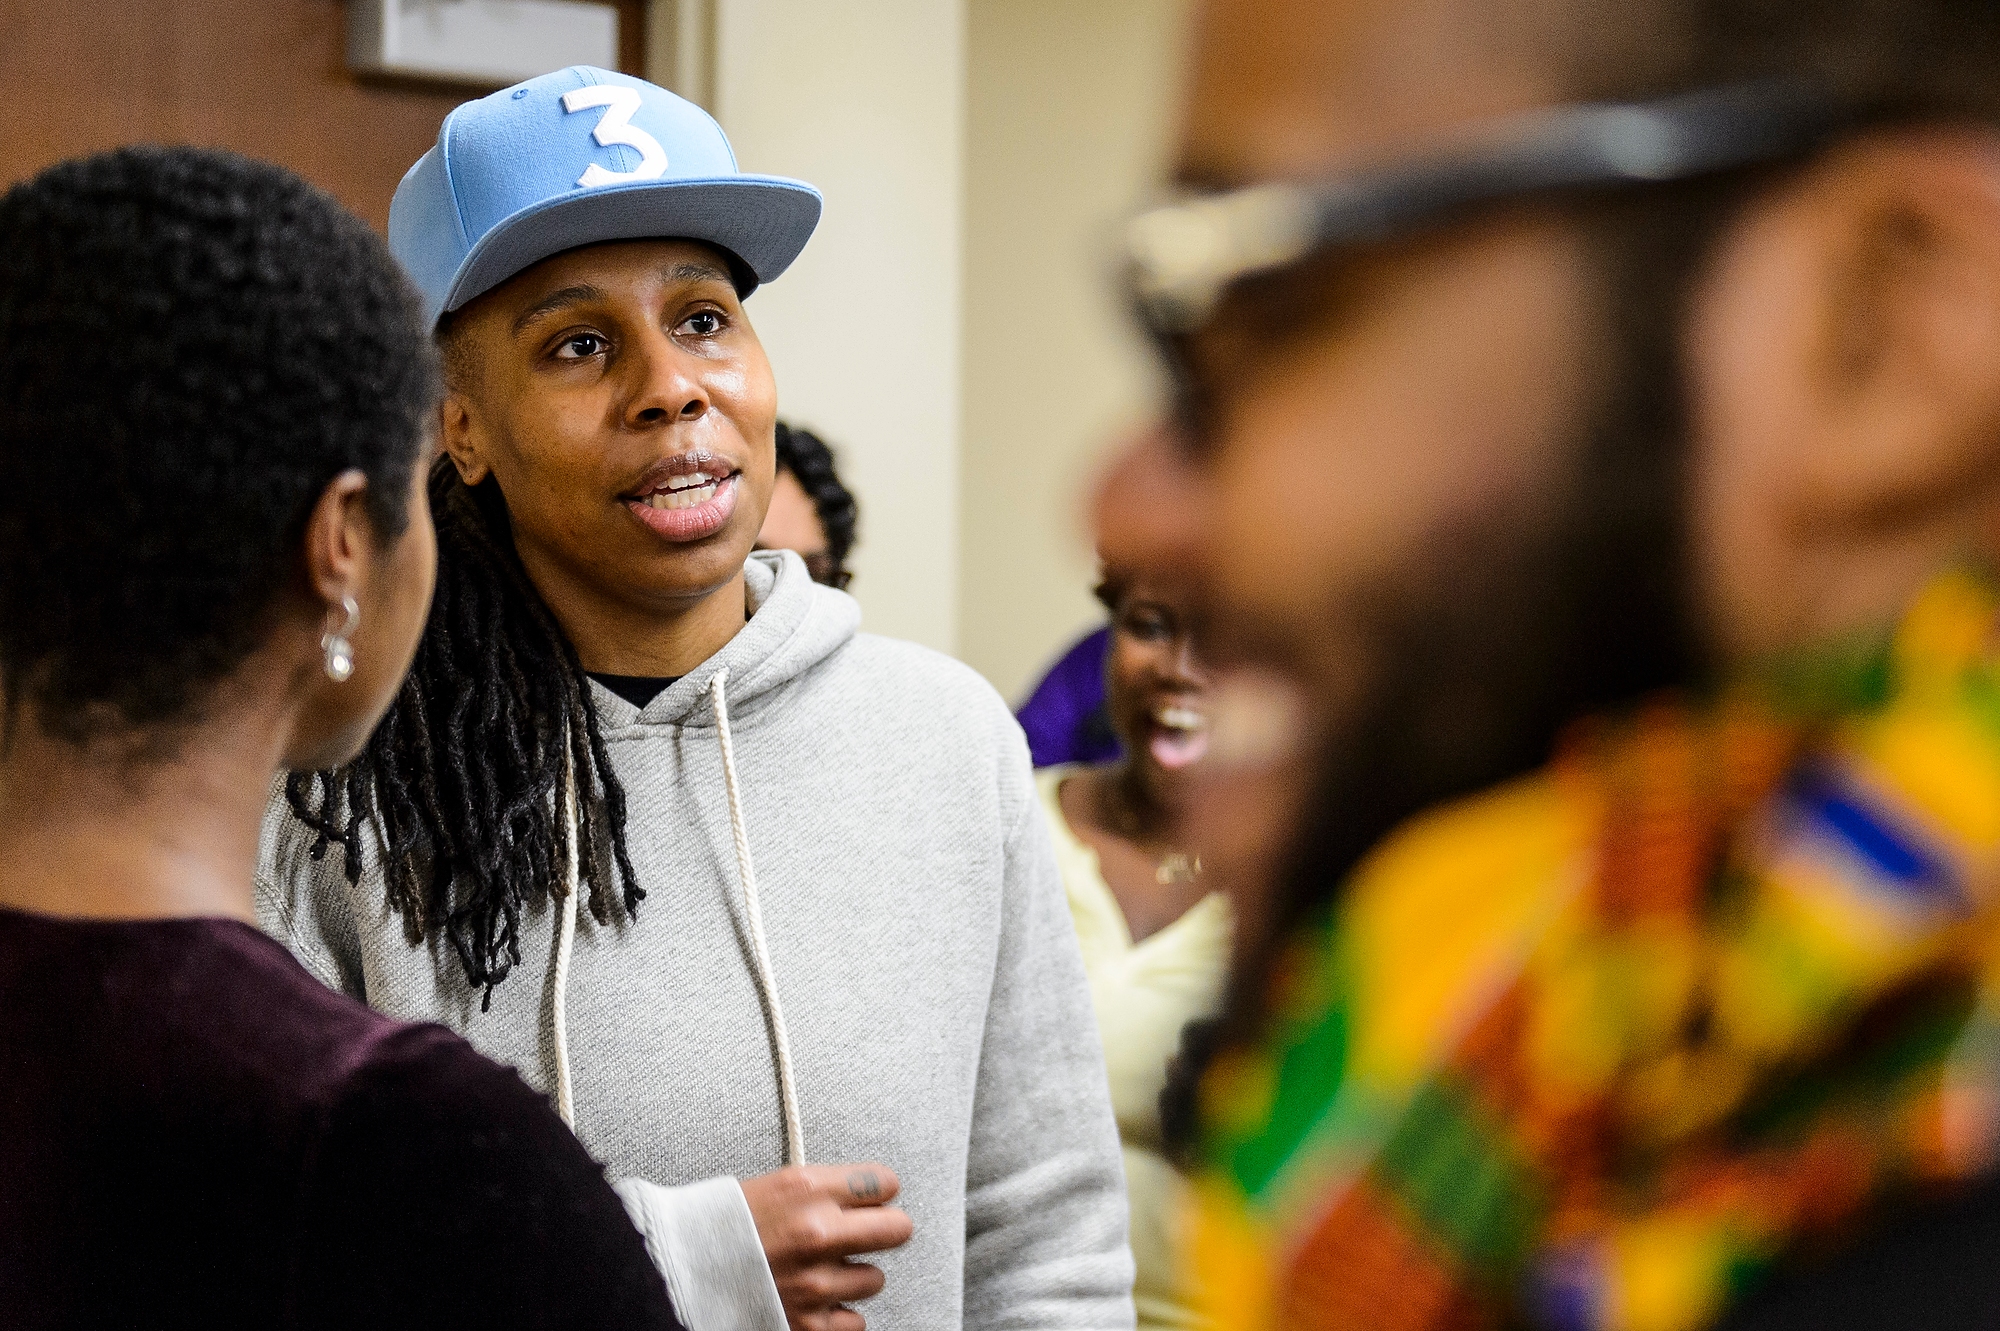 Emmy-winning writer, actress and producer Lena Waithe talks with invited UW-Madison students and guests during a meet-and-greet session with at the Union South.